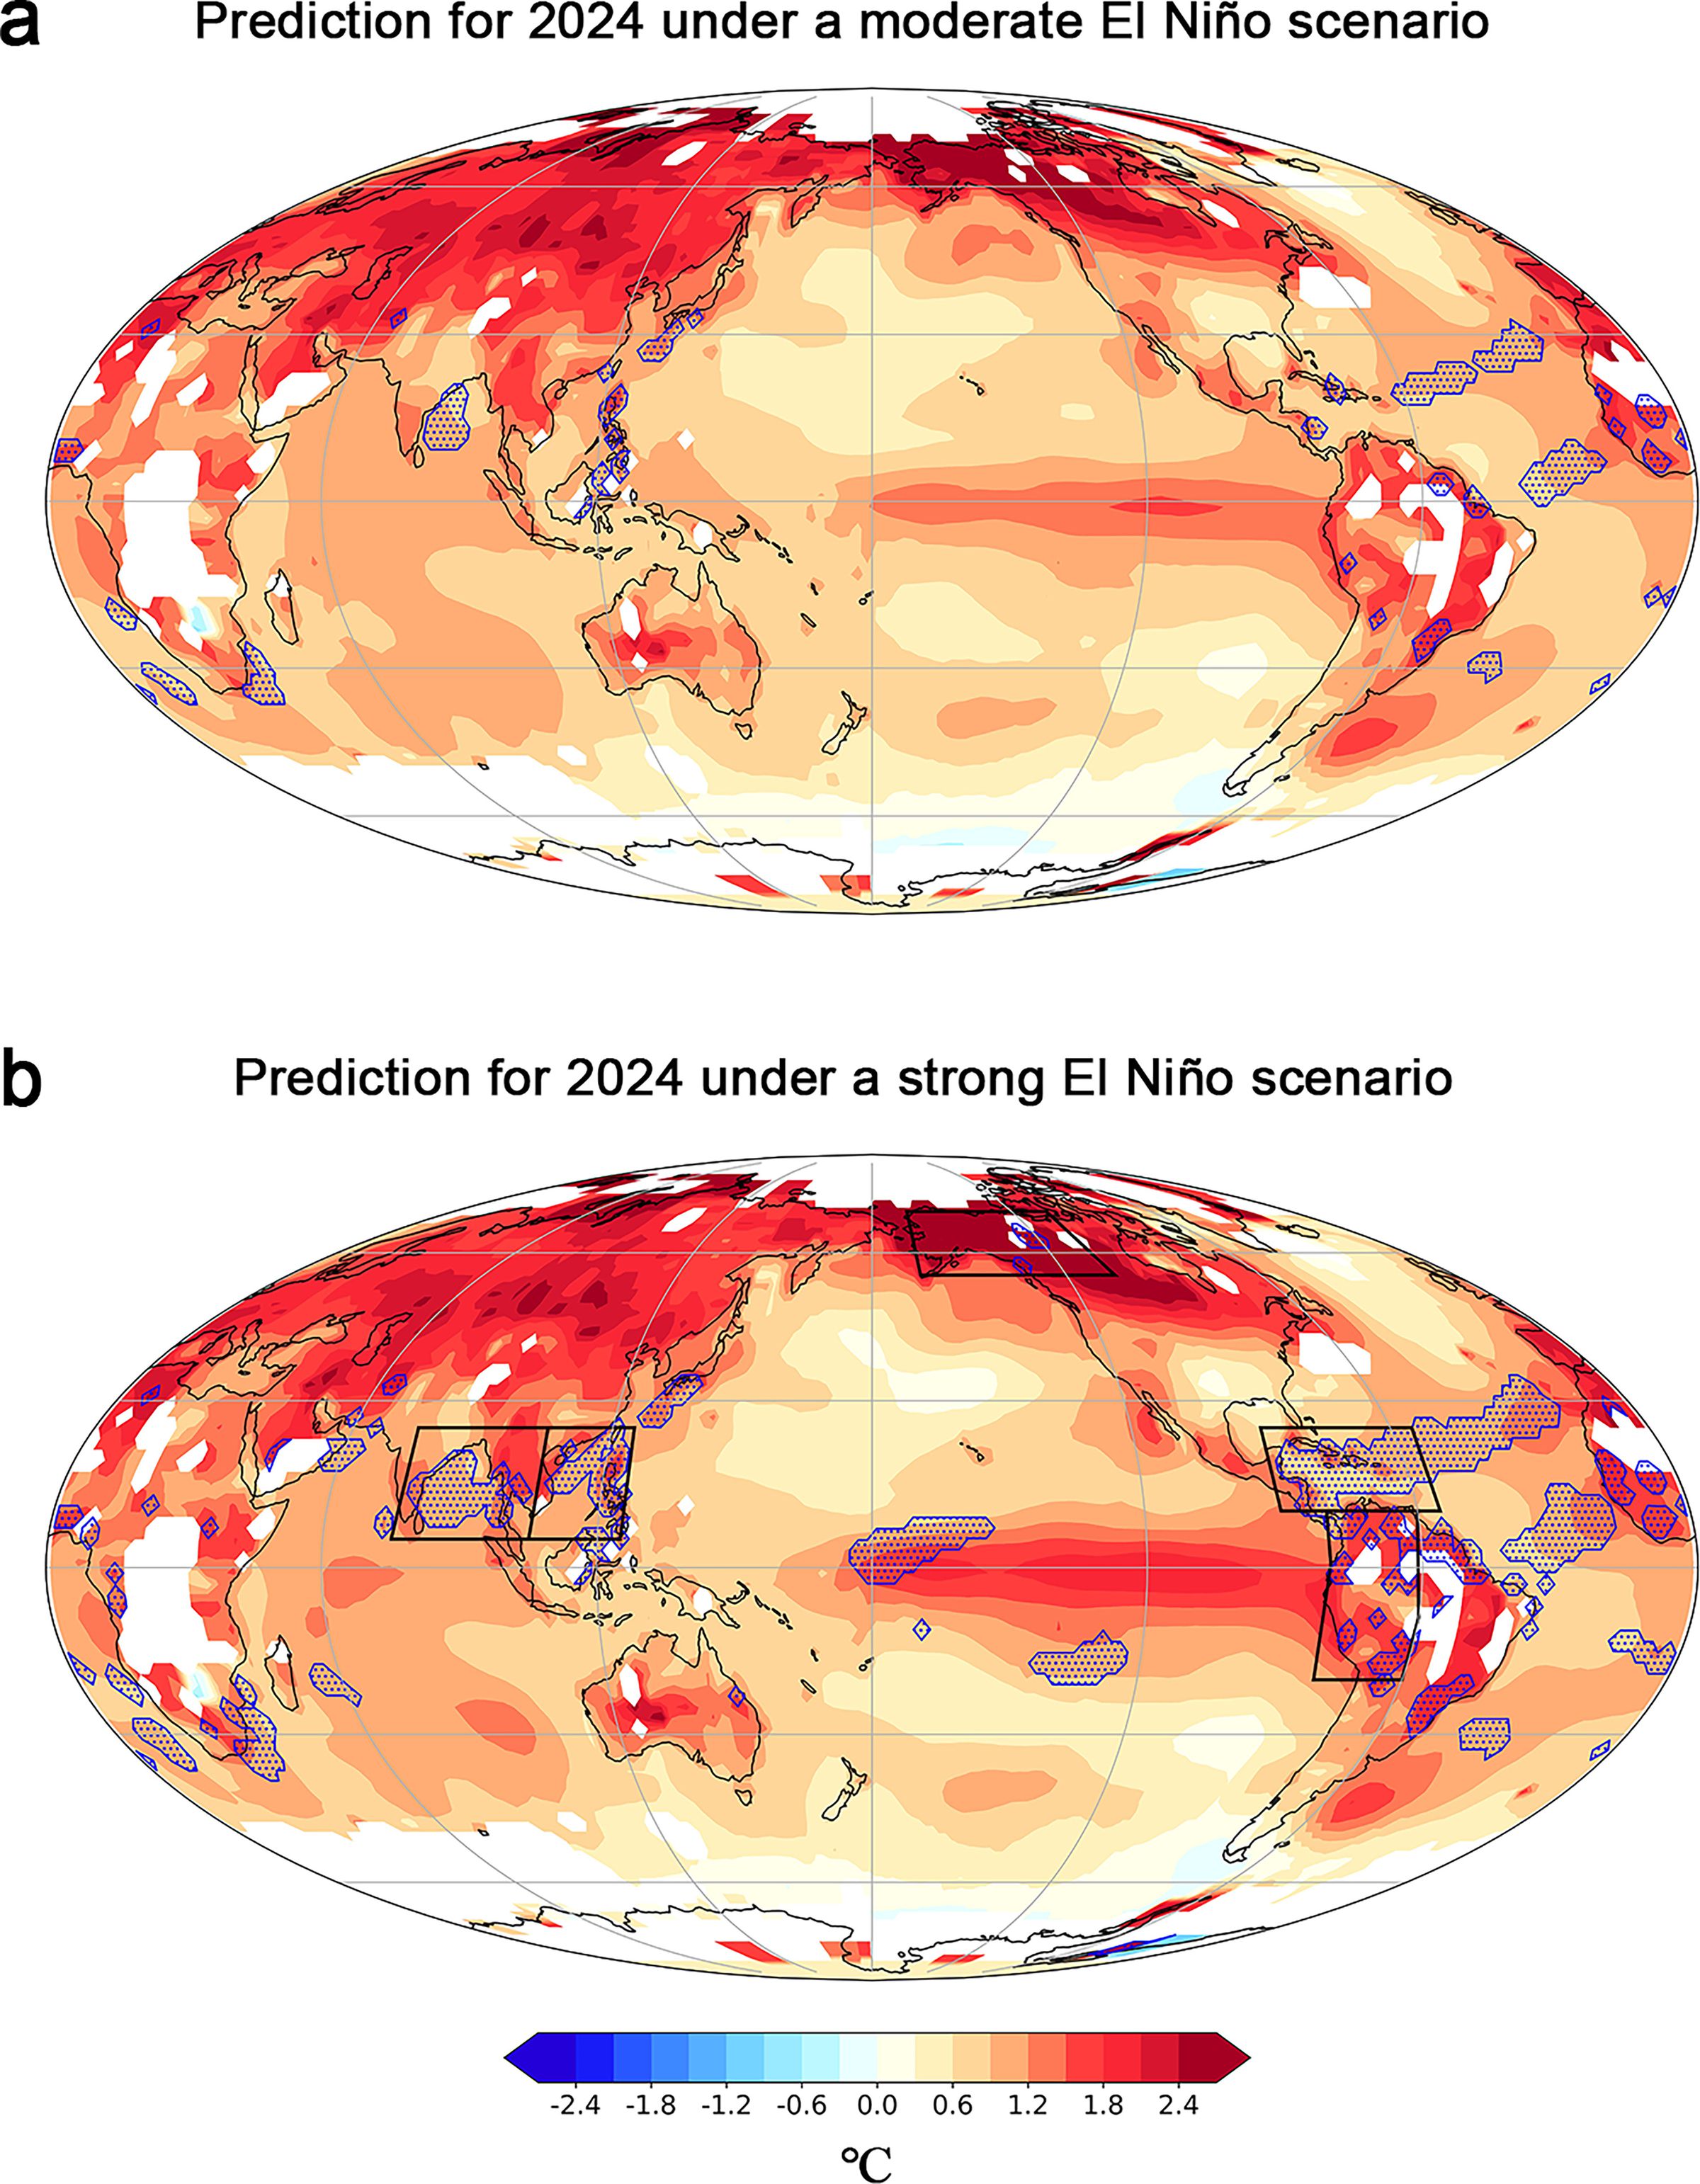 Two maps depict global temperatures under a) a moderate El Niño scenario and b) a strong El Niño scenario. The regions expected to experience record-breaking heat are marked by blue dots. Black boxes in (b) note hard-hit regions: the Bay of Bengal, the South China Sea, the Caribbean Sea , Alaska, and the Amazon.